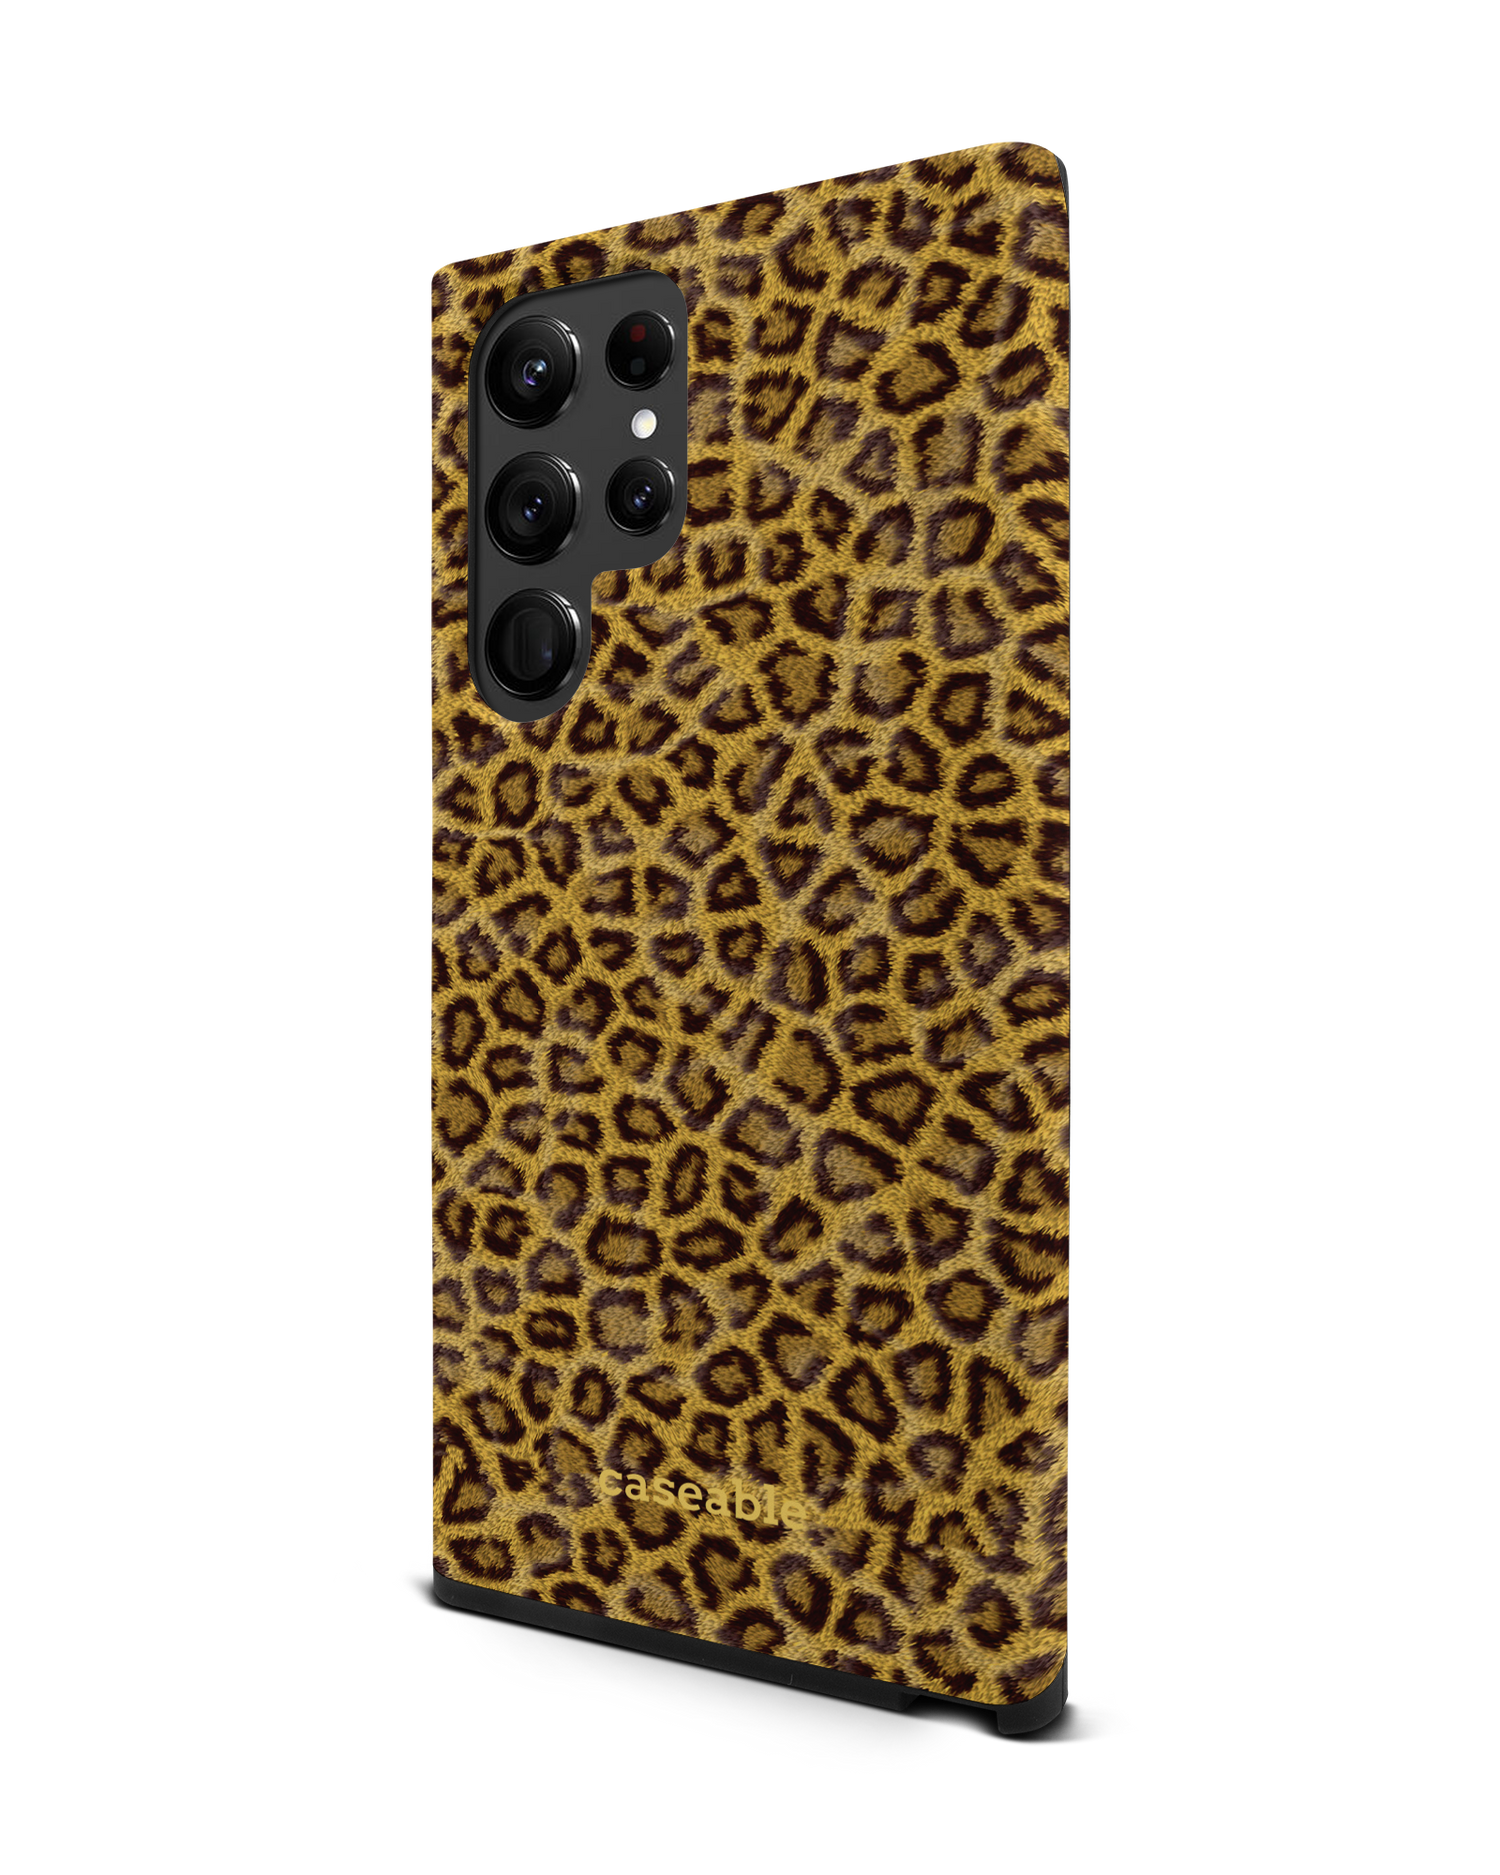 Leopard Skin Premium Phone Case Samsung Galaxy S22 Ultra 5G: View from the right side